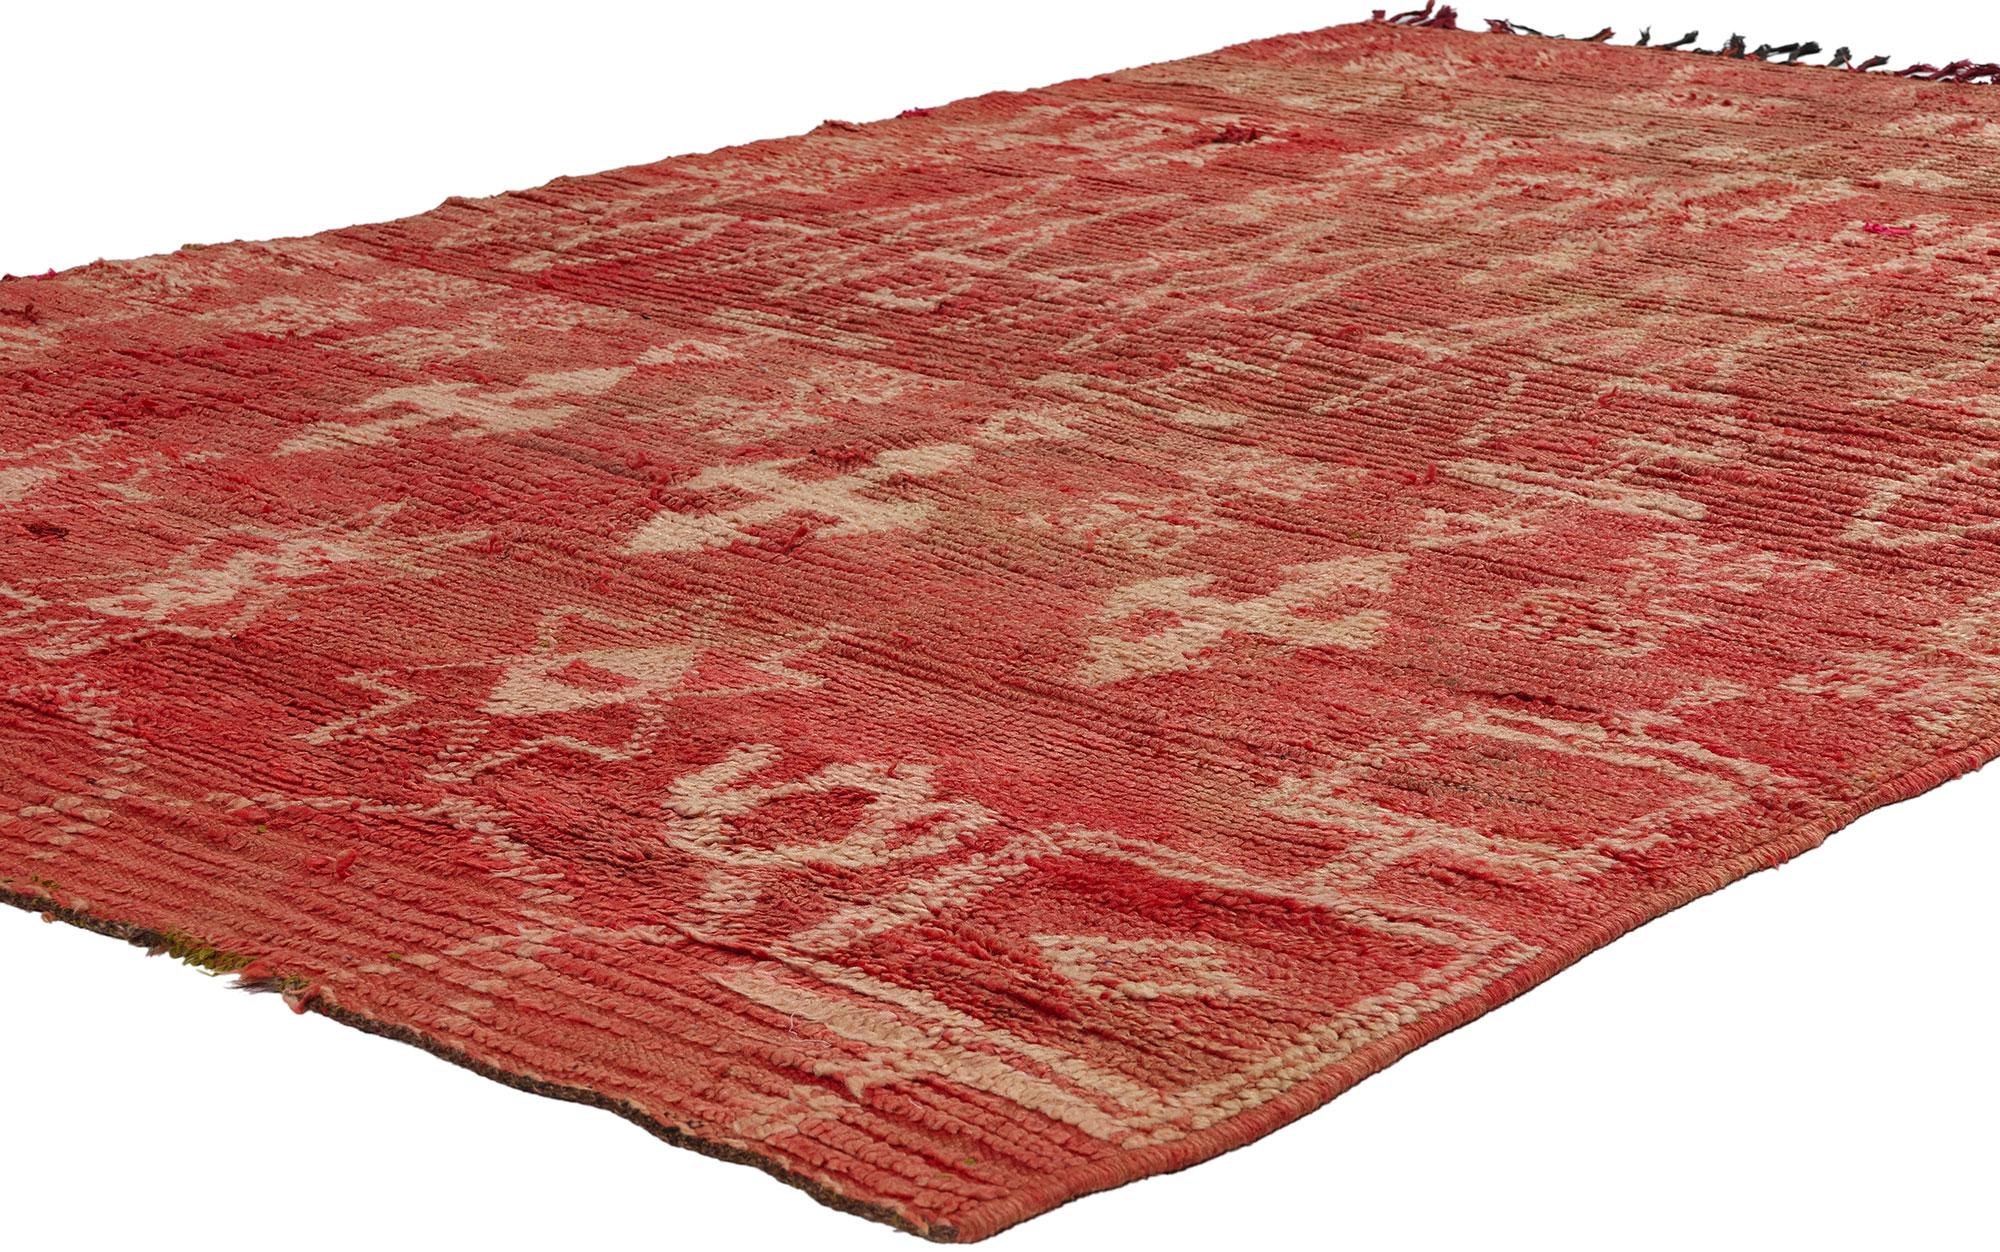 21814 Vintage Red Boujad Moroccan Rug, 05'00 x 07'06. Emerging from Morocco's Boujad region, Boujad rugs are exquisite handwoven masterpieces deeply rooted in the traditions of Berber tribes such as the Haouz and Rehamna. Vibrant and dynamic, these